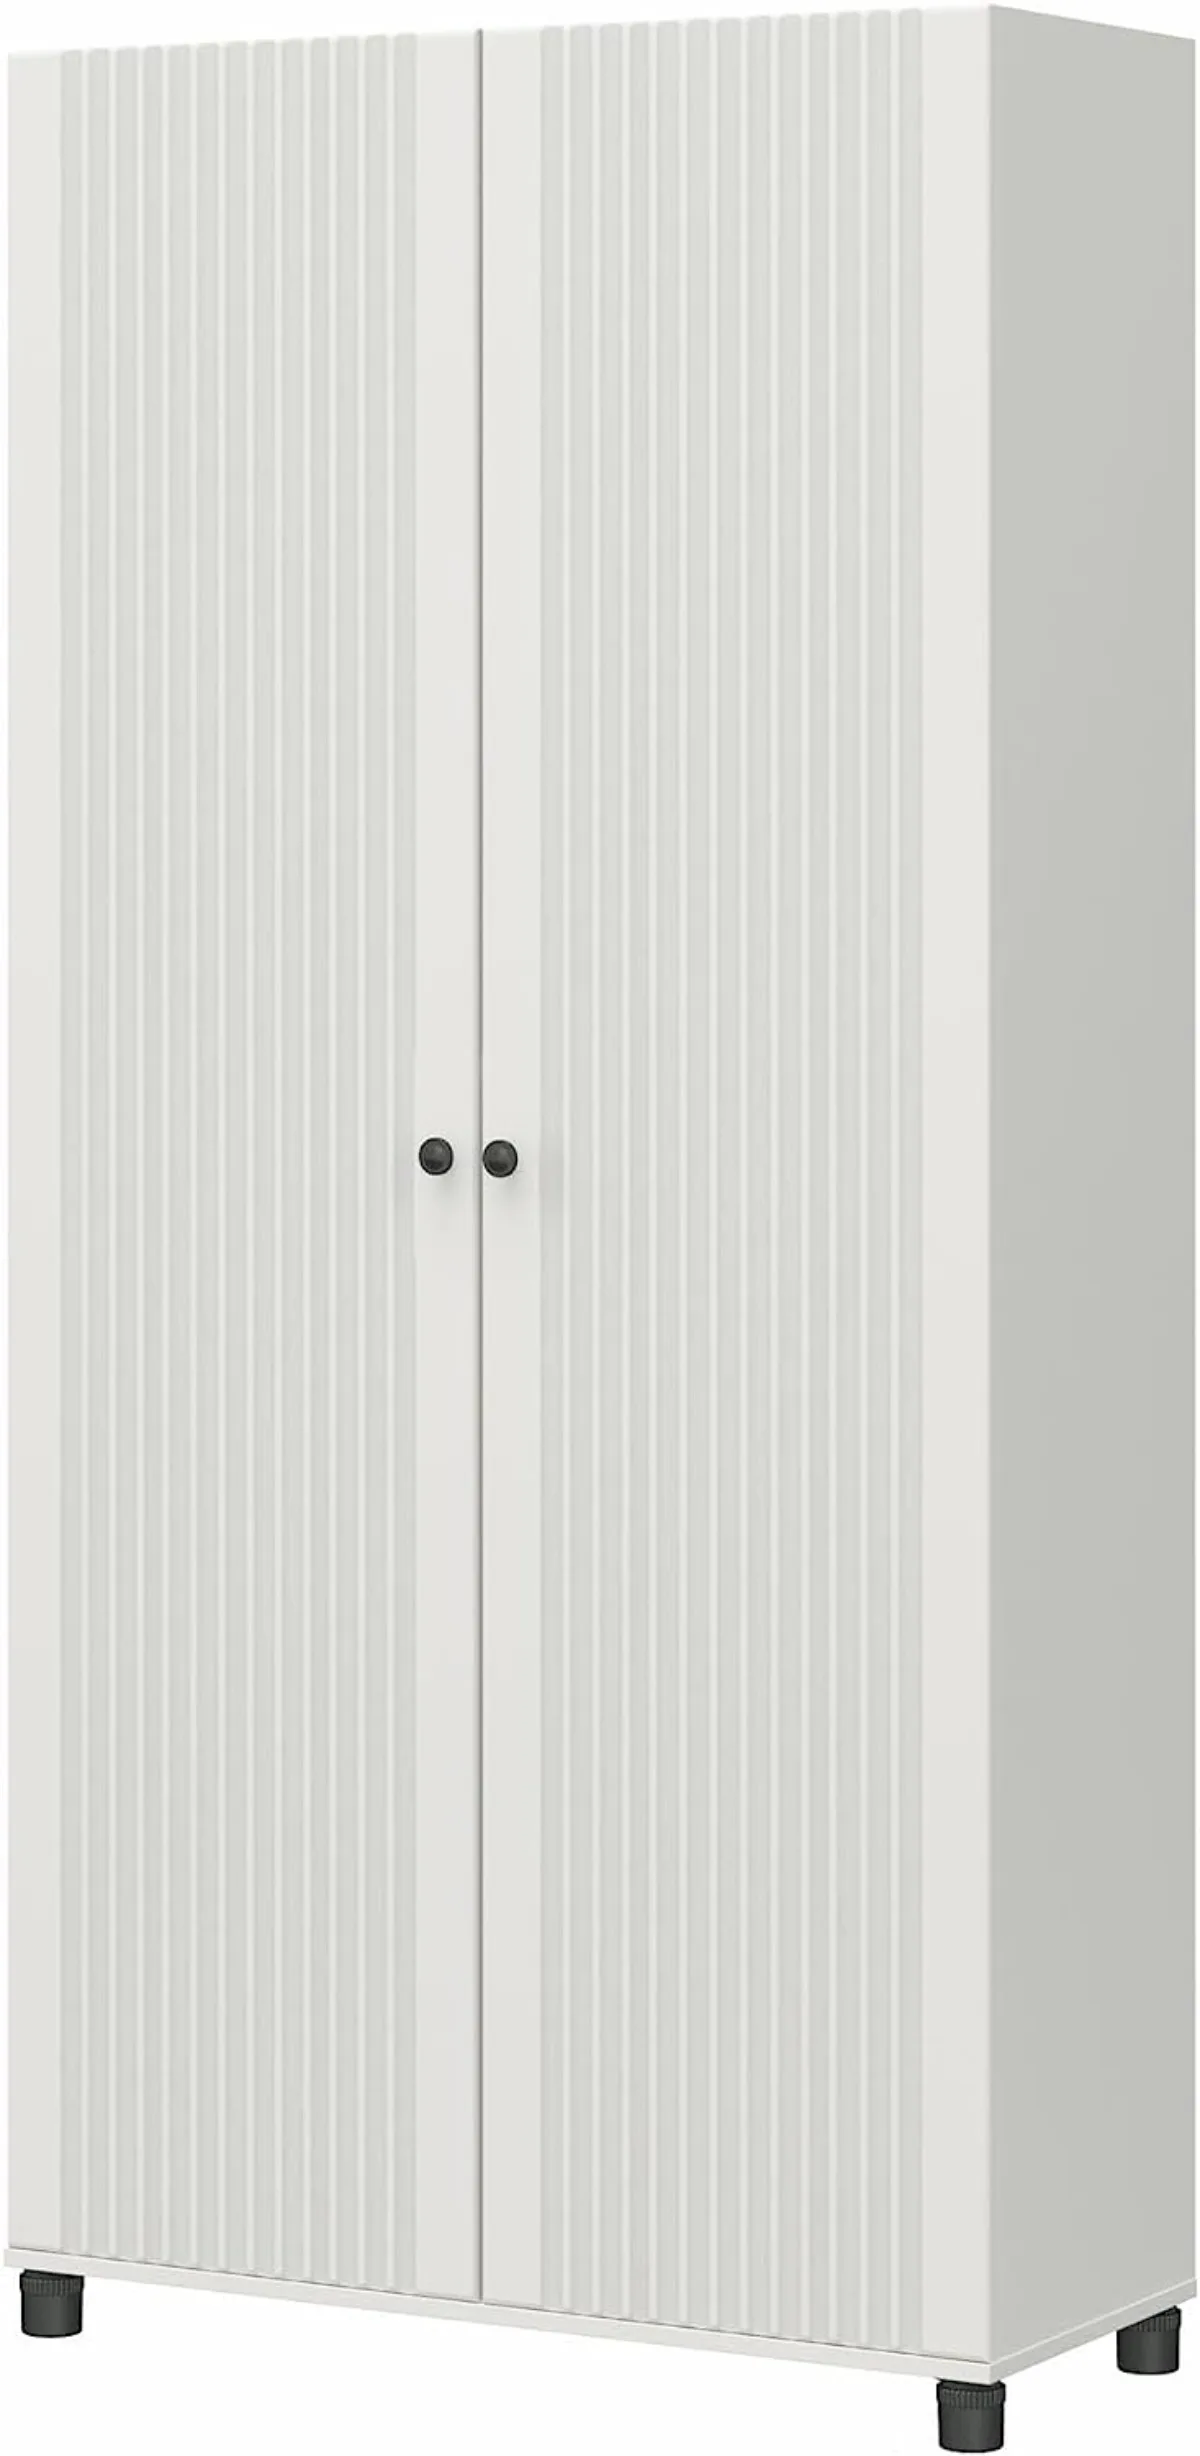 

Kendall 36" Wide 2 Door Storage Cabinet, Fluted White